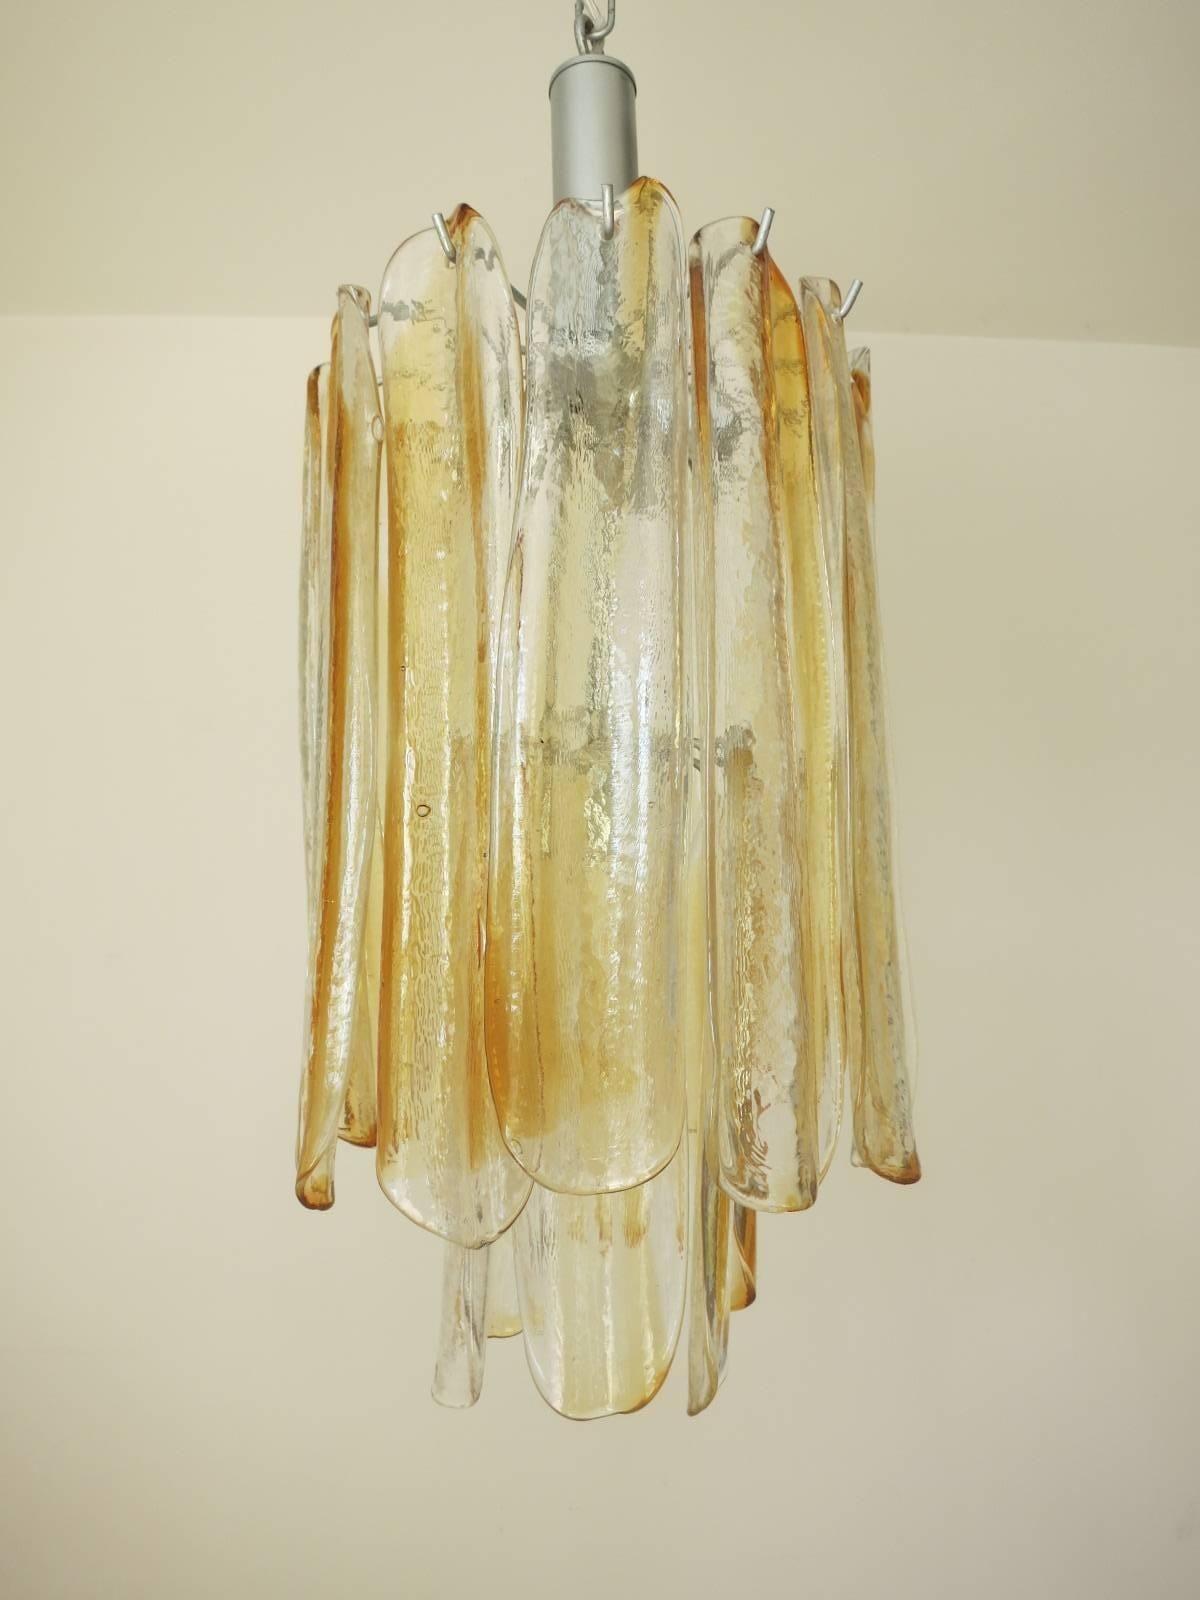 This stunning vintage chandelier consists of 18 infused amber and clear Murano glass petals stacked in two tiers, mounted on a nickel painted metal frame. Designed by Mazzega, Italy, c. 1960's.
Dimensions:
26.5